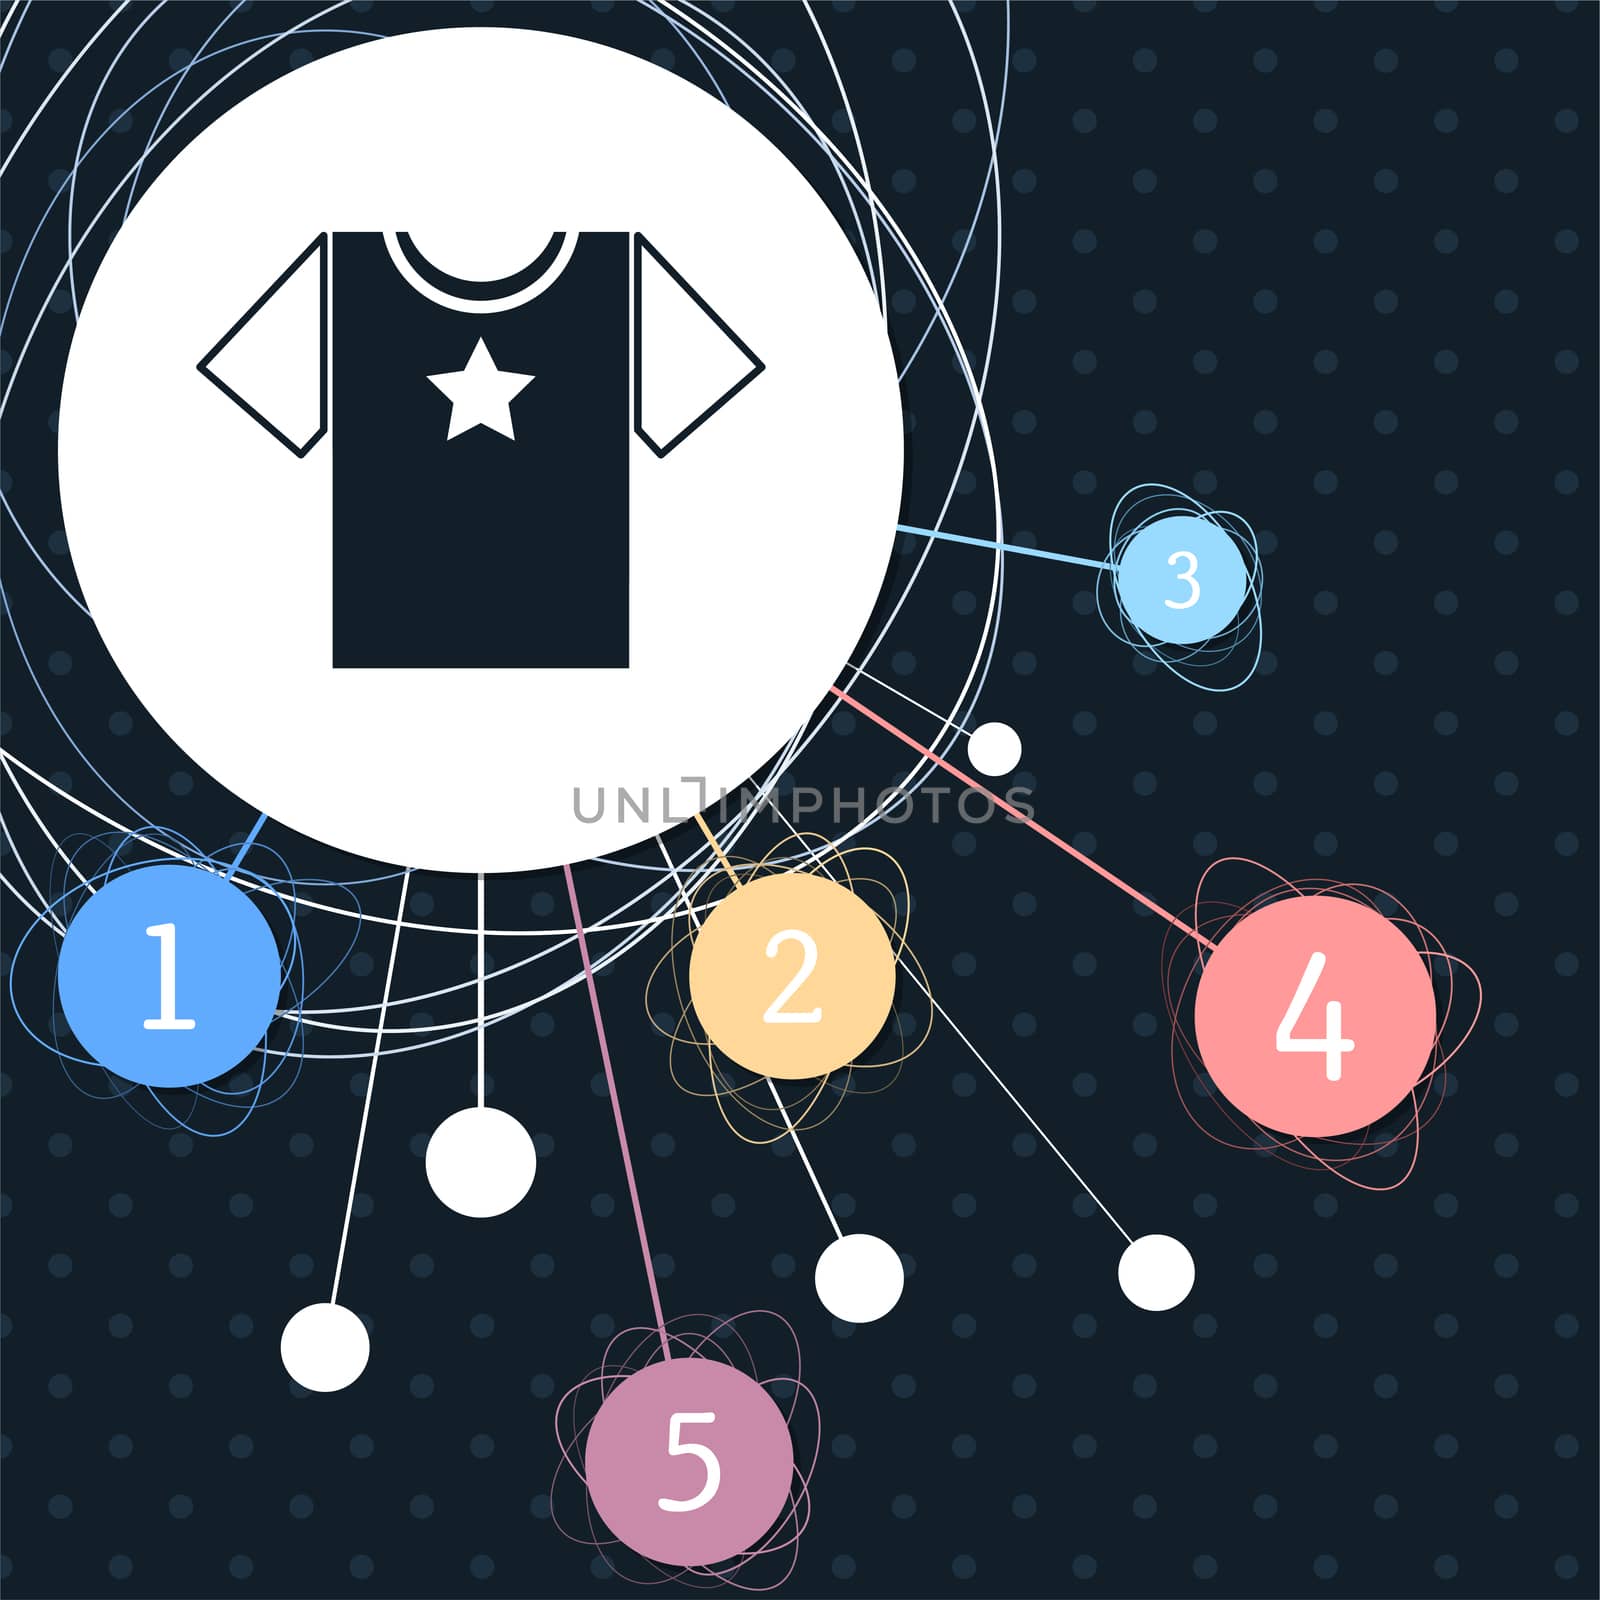 t-shirt icon with the background to the point and with infographic style. illustration